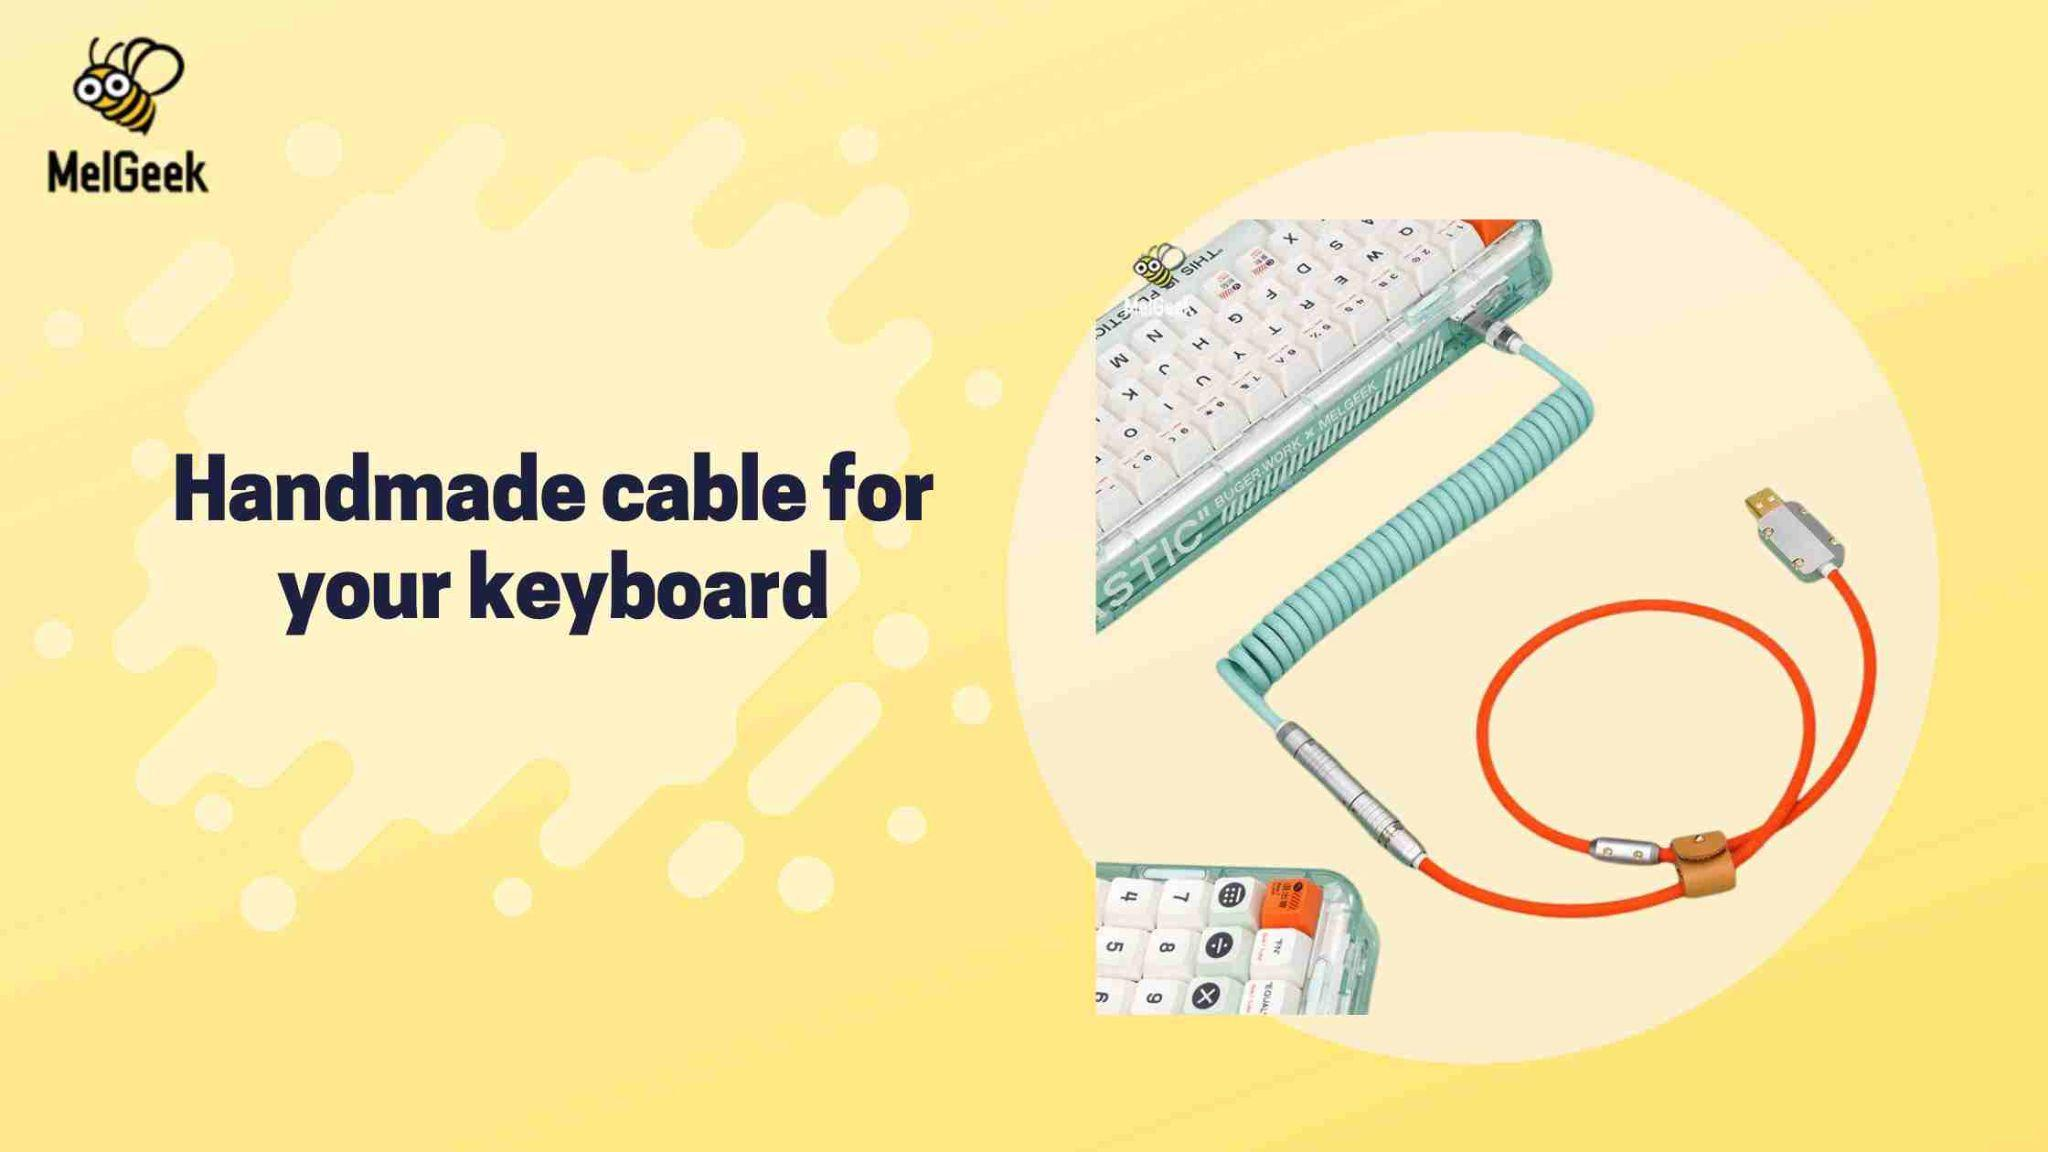 Handmade Cables for Keyboards: Customizing Your Typing Experience